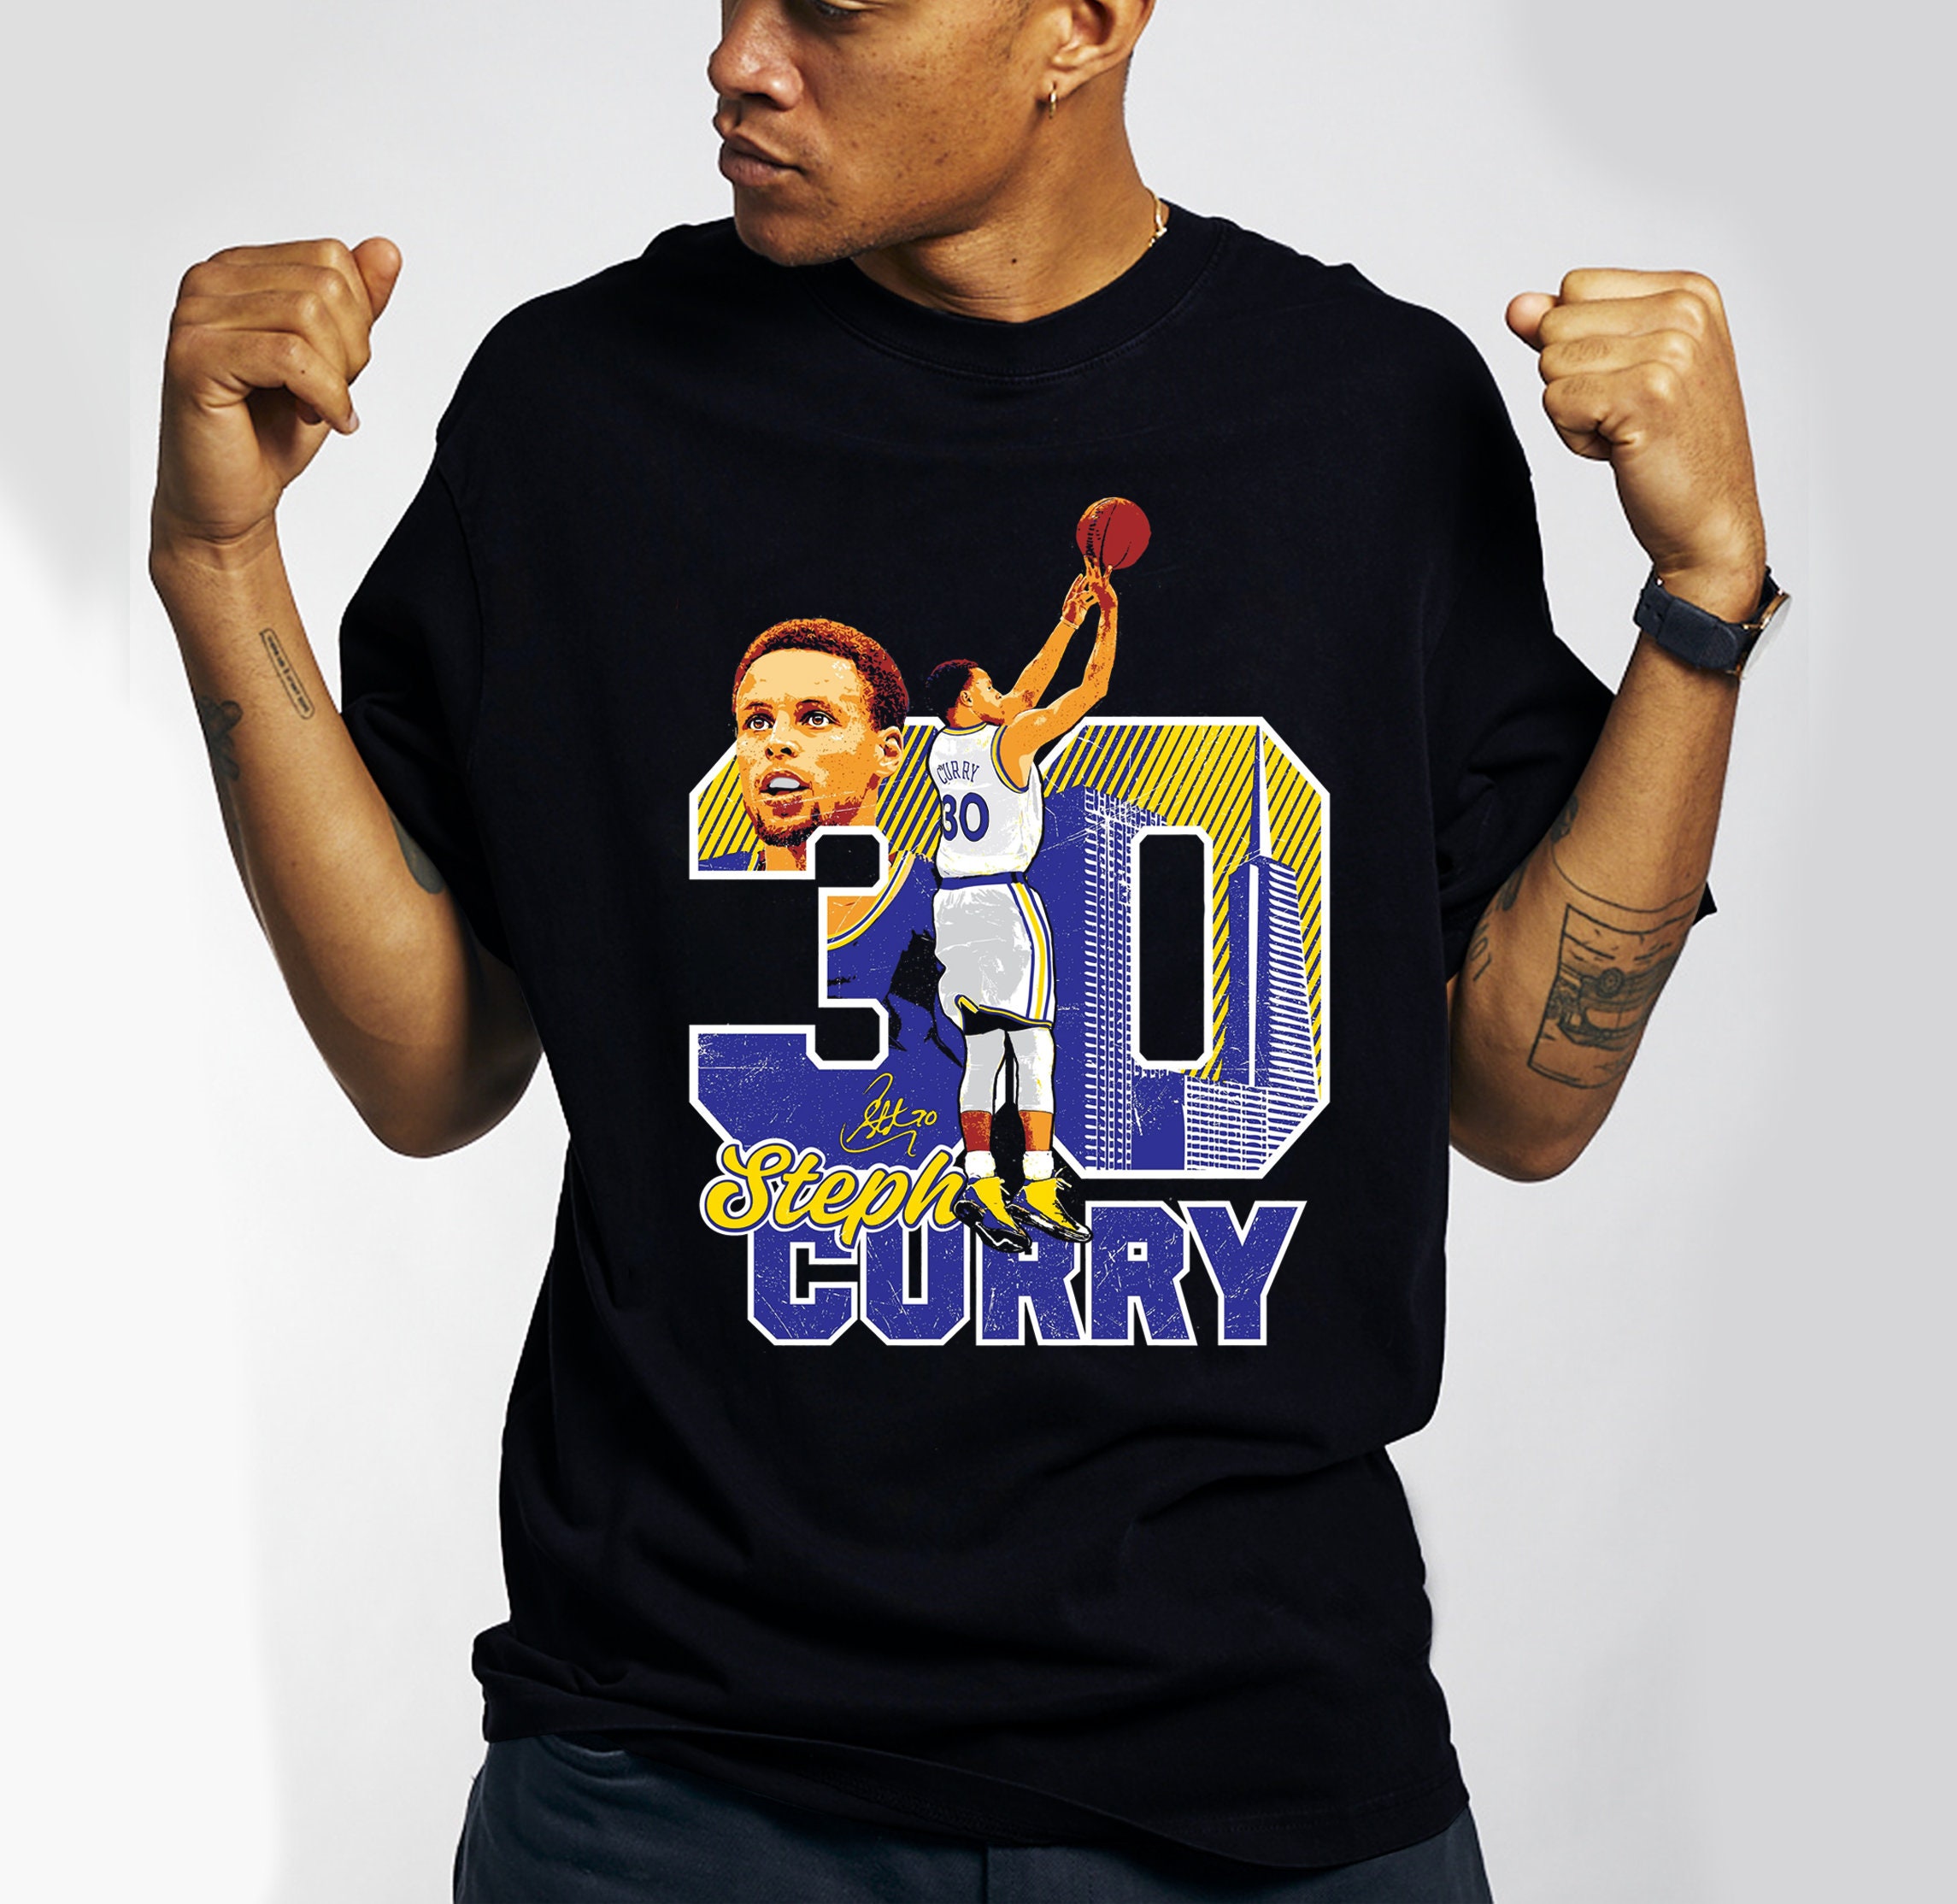 Retro Golden State Warriors Comic Book Stephen Curry T-Shirt from Homage.